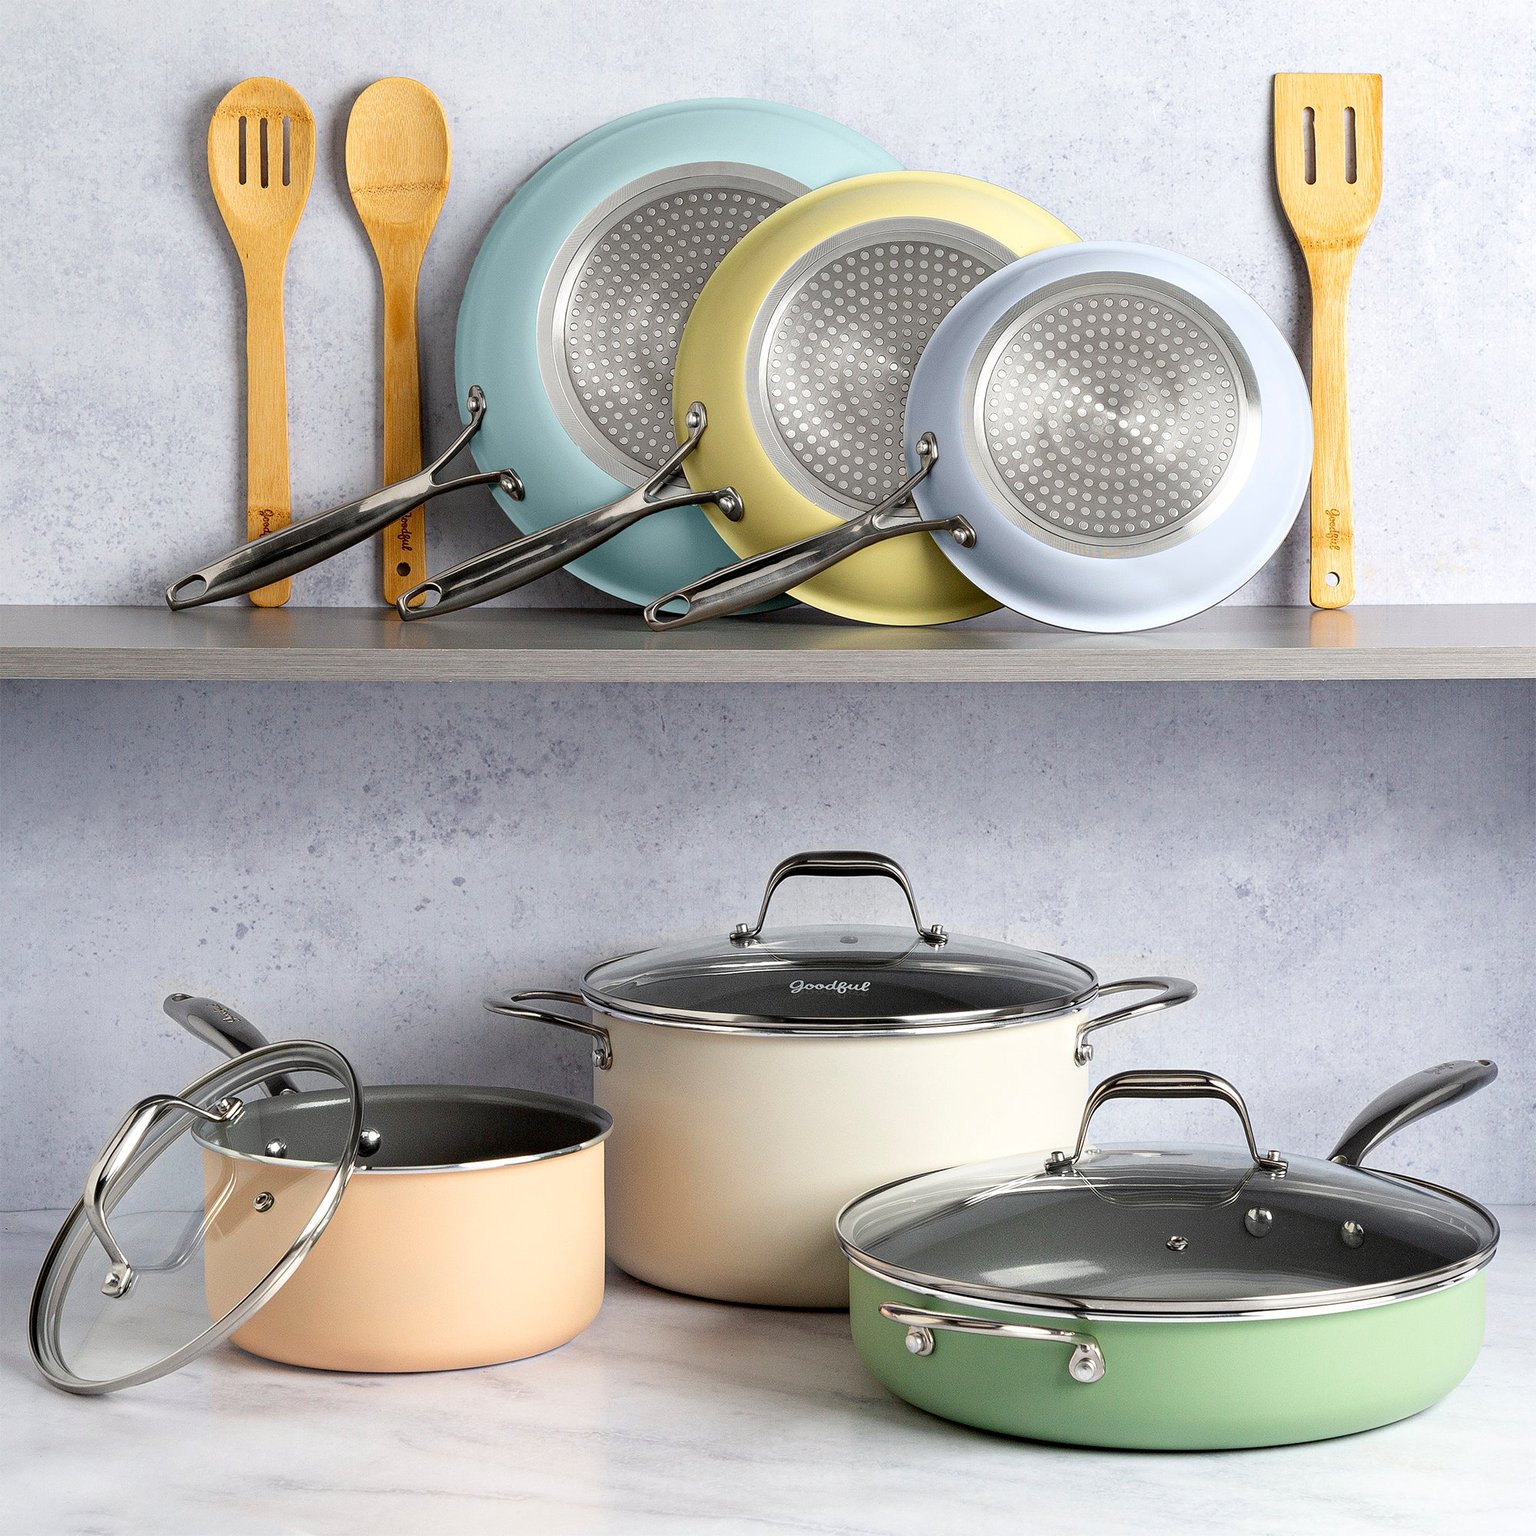 Goodful Cookware Set with Premium Non-Stick Coating, Dishwasher Safe Pots and Pans